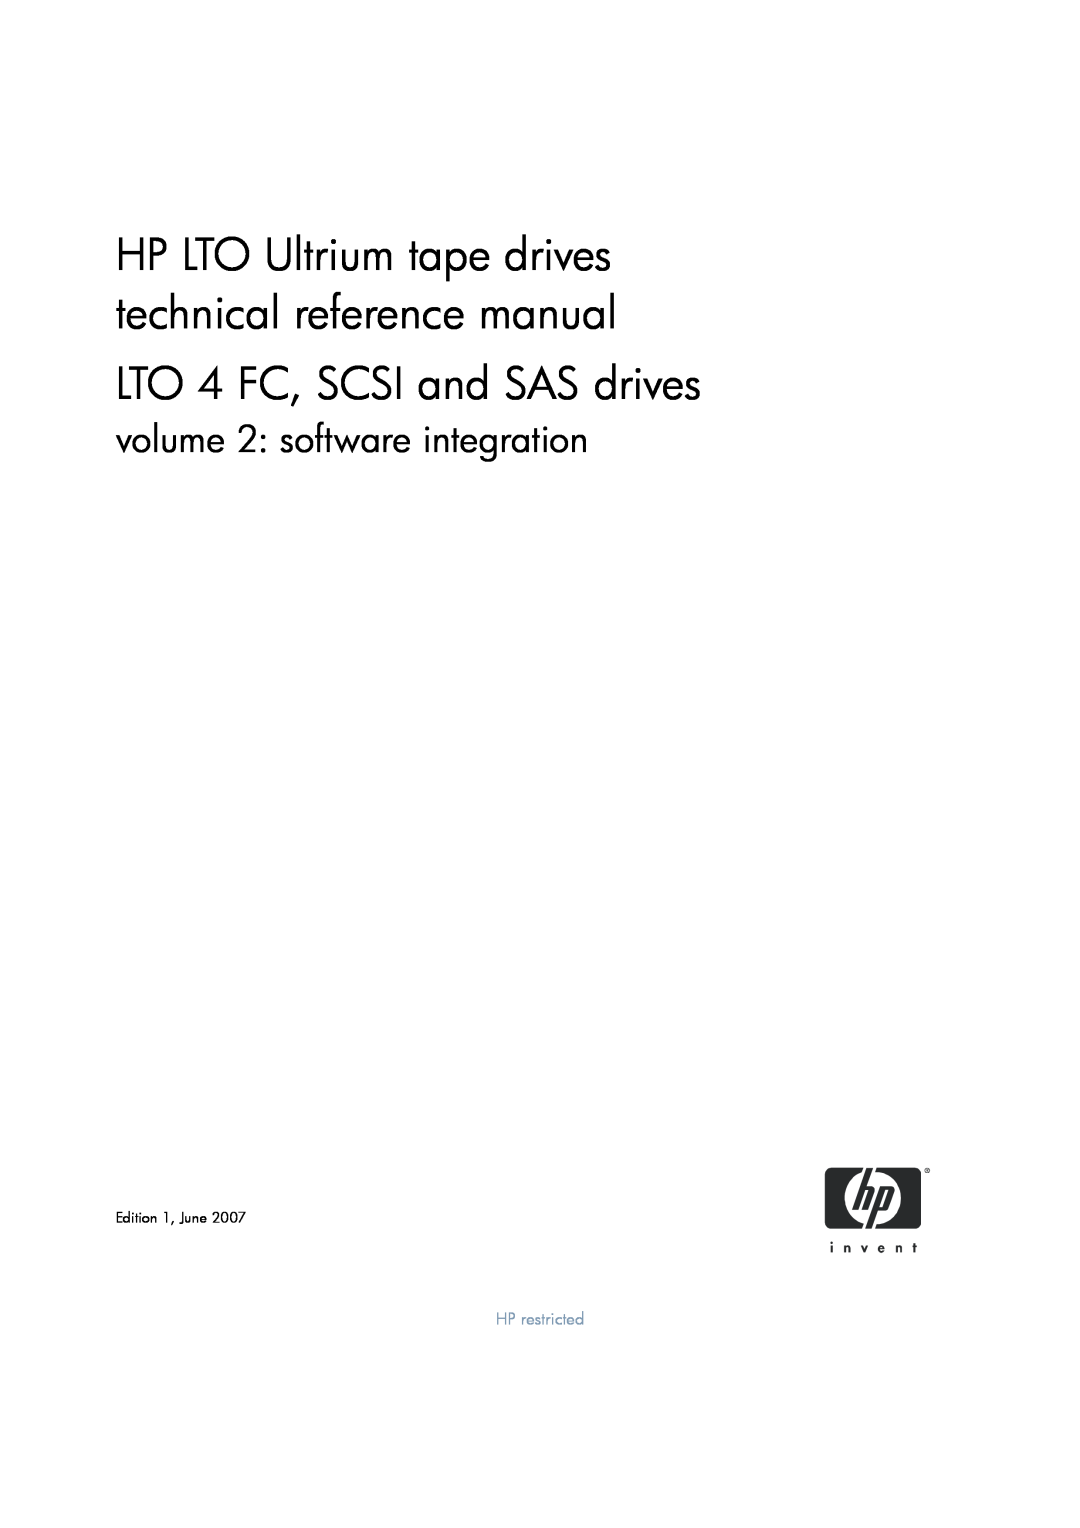 HP LTO 4 SCSI manual LTO 4 FC, SCSI and SAS drives, HP LTO Ultrium tape drives technical reference manual, HP restricted 